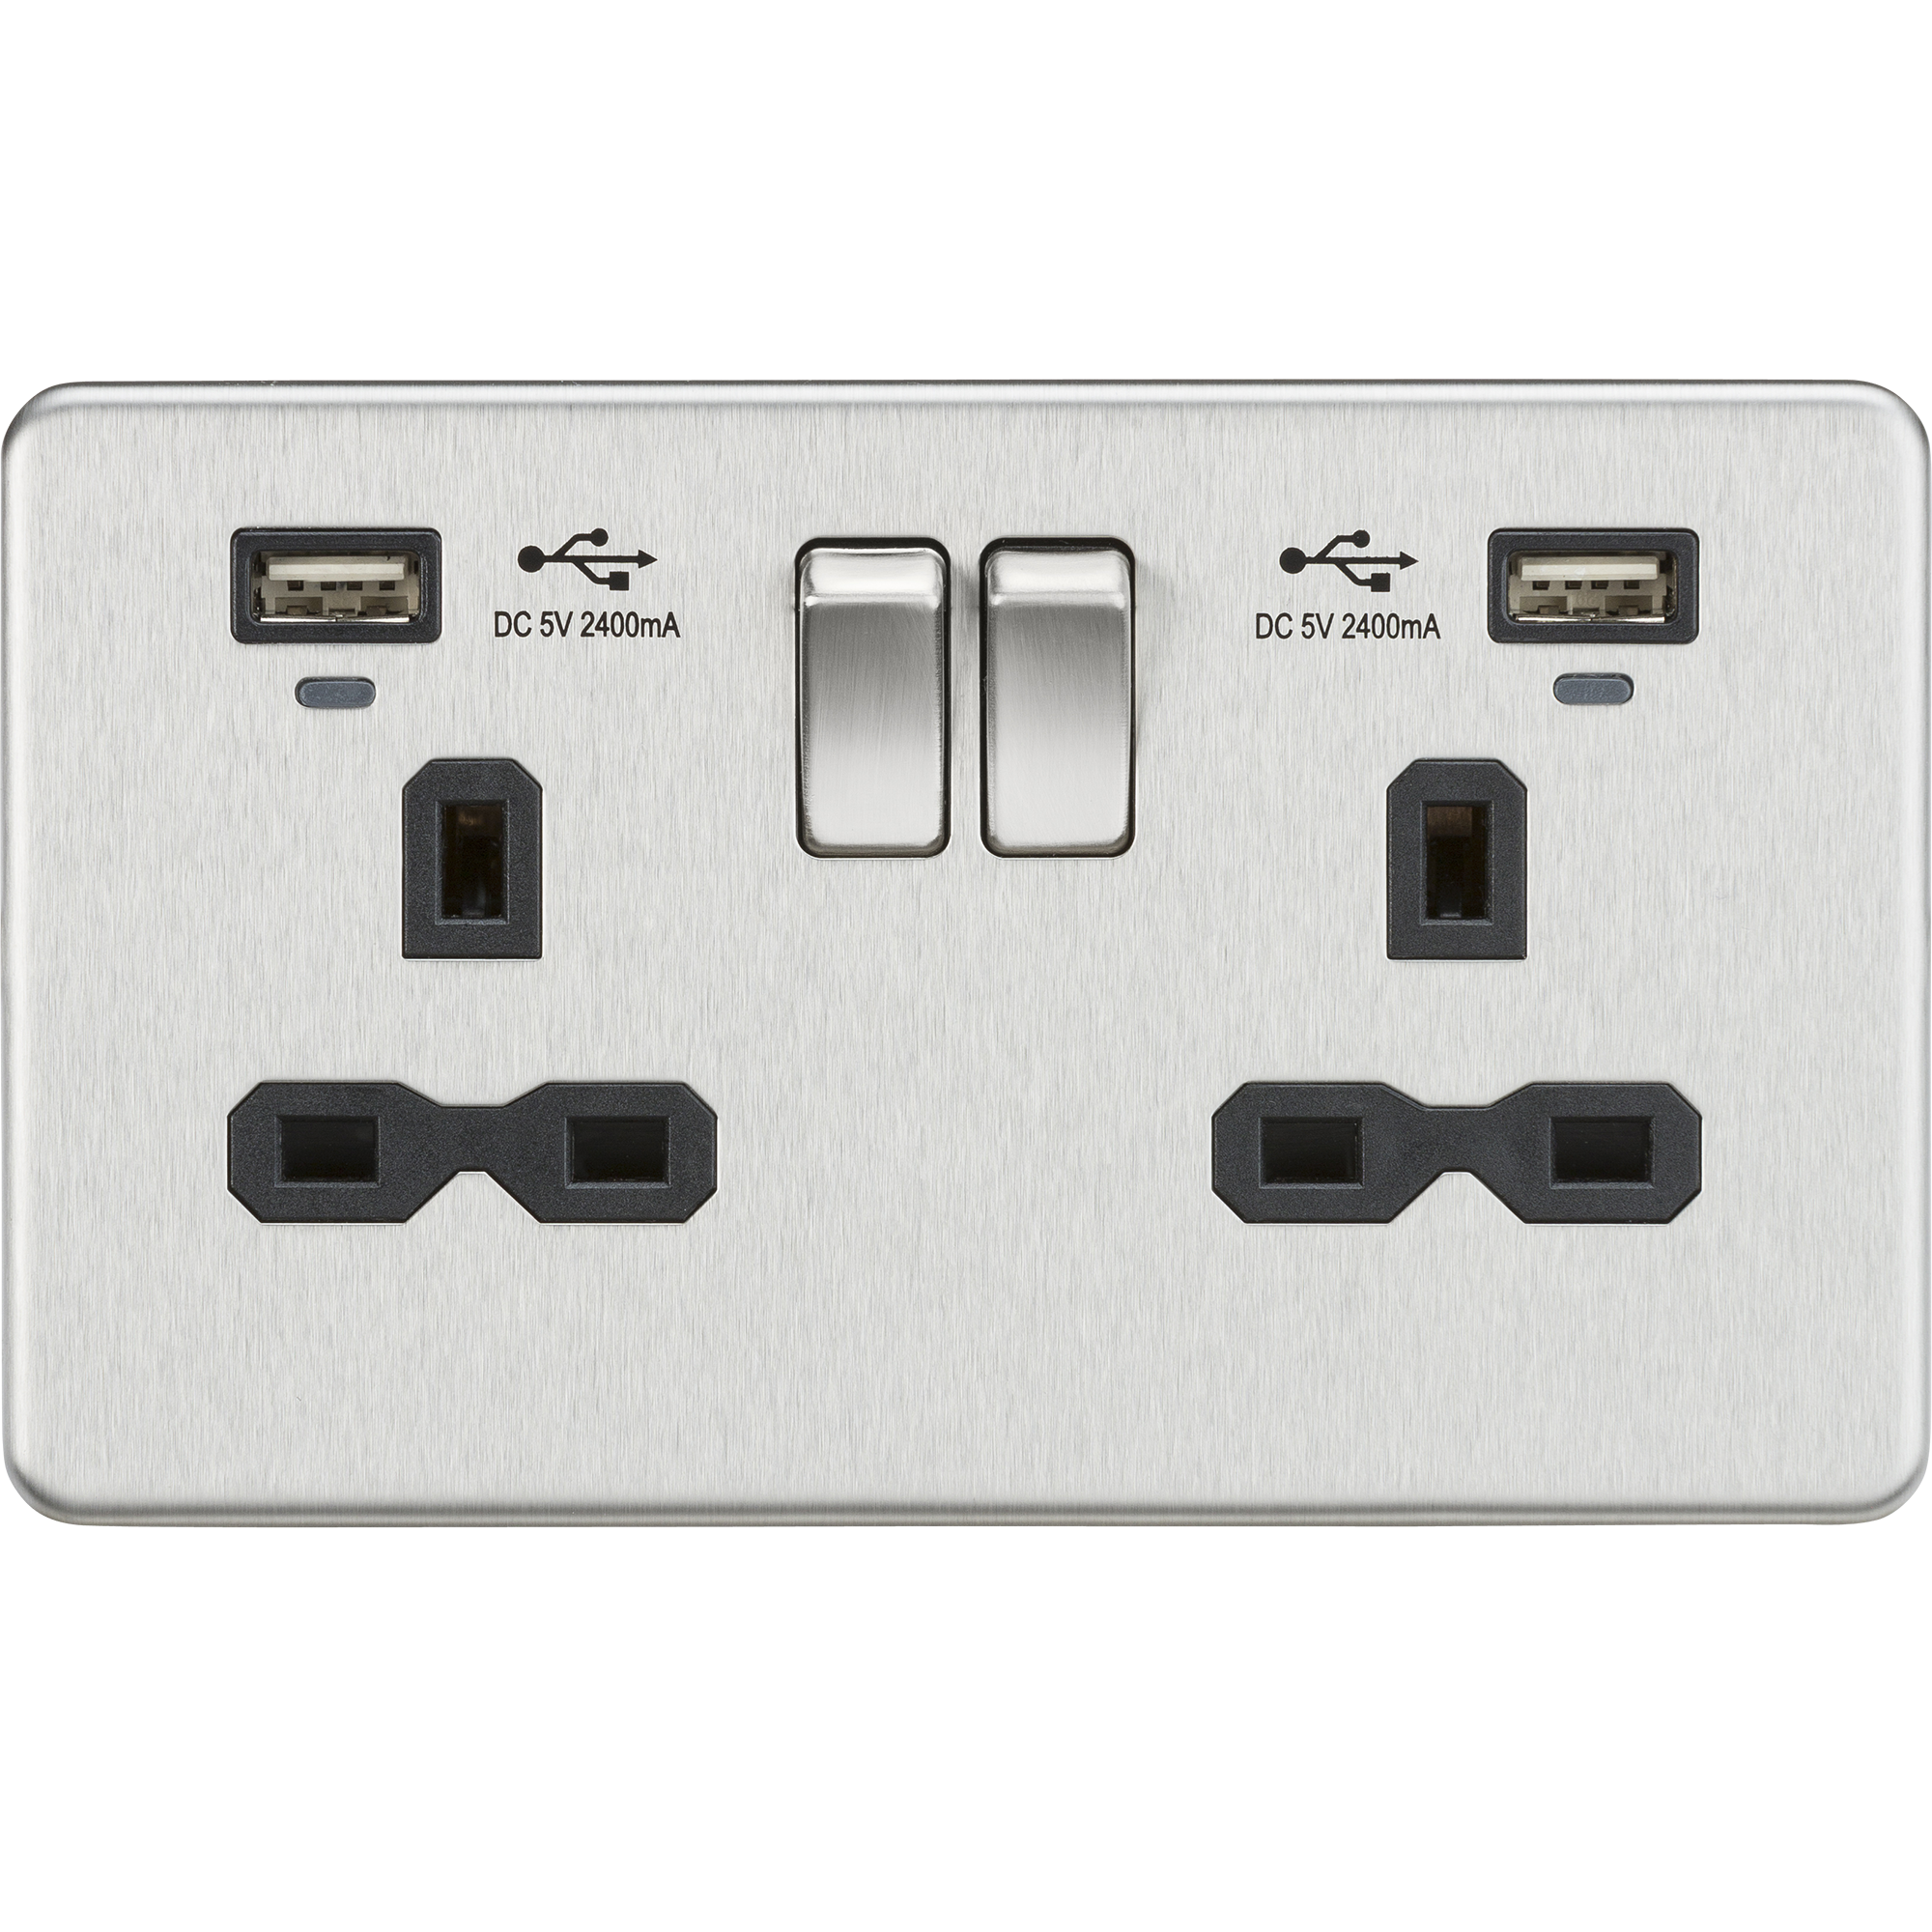 Screwless 13A Smart 2G Switched Socket With Dual USB Charger 2.4A - Brushed Chrome With Black Insert - SFR9904NBC 